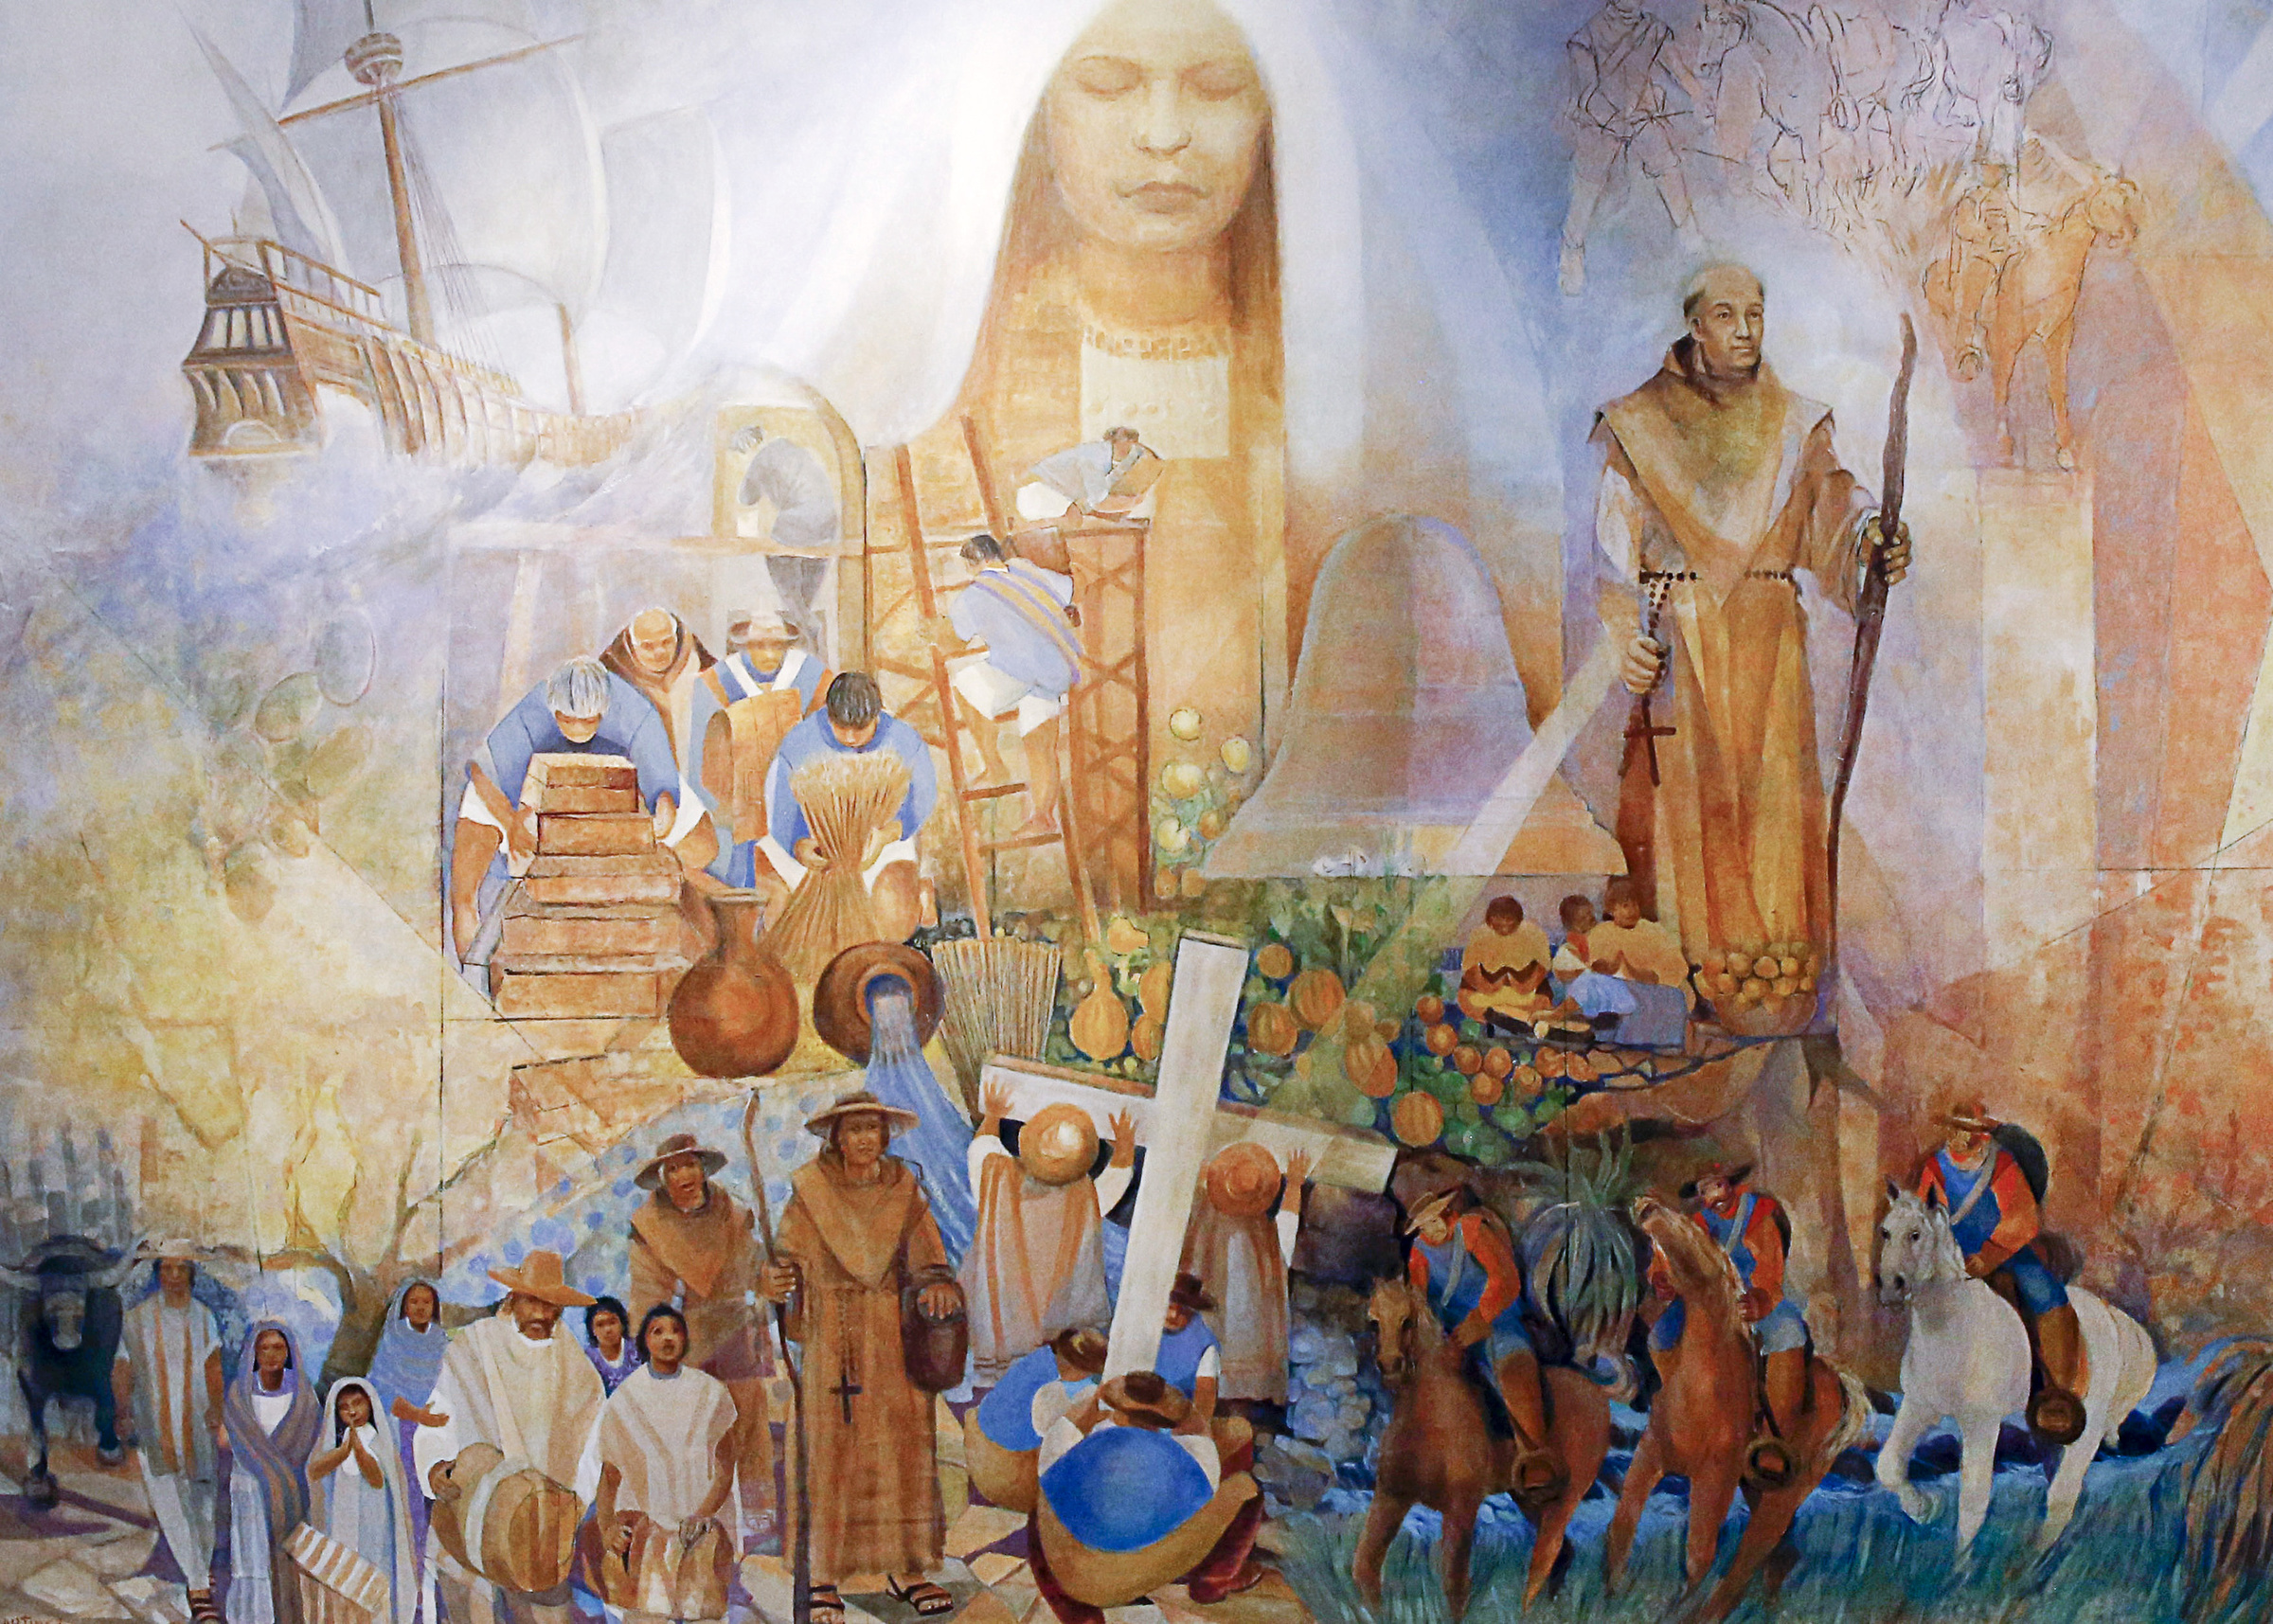 A mural by Frank A. Martinez greets people entering the Cathedral of Our Lady of the Angels in Los Angeles, Calif. The rendering depicts figures from early 18th-century California, including Blessed Junipero Serra (right) and native people building the missions and harvesting crops. (CNS/Nancy Wiechec)